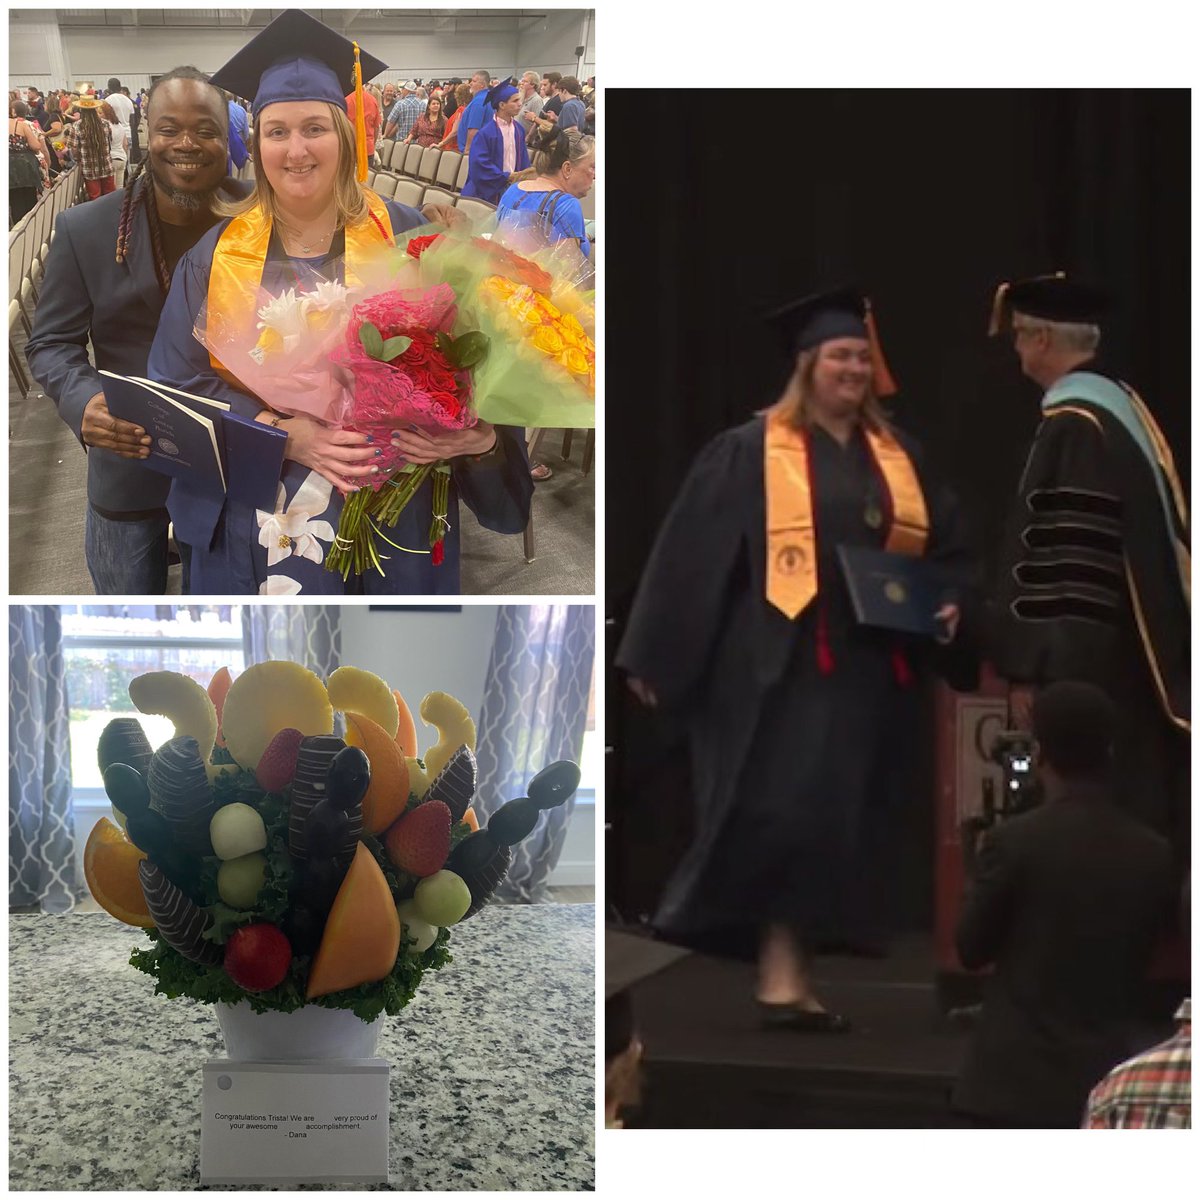 Thank you to a great Team-They have shown me so much love and support with the completion of my Bachelor’s degree. They not only watched the live stream of my graduation they sent me a beautiful and delicious arrangement 
#DCWBossMode #GuinningTogether #MBCGoodStuff #LifeAtATT